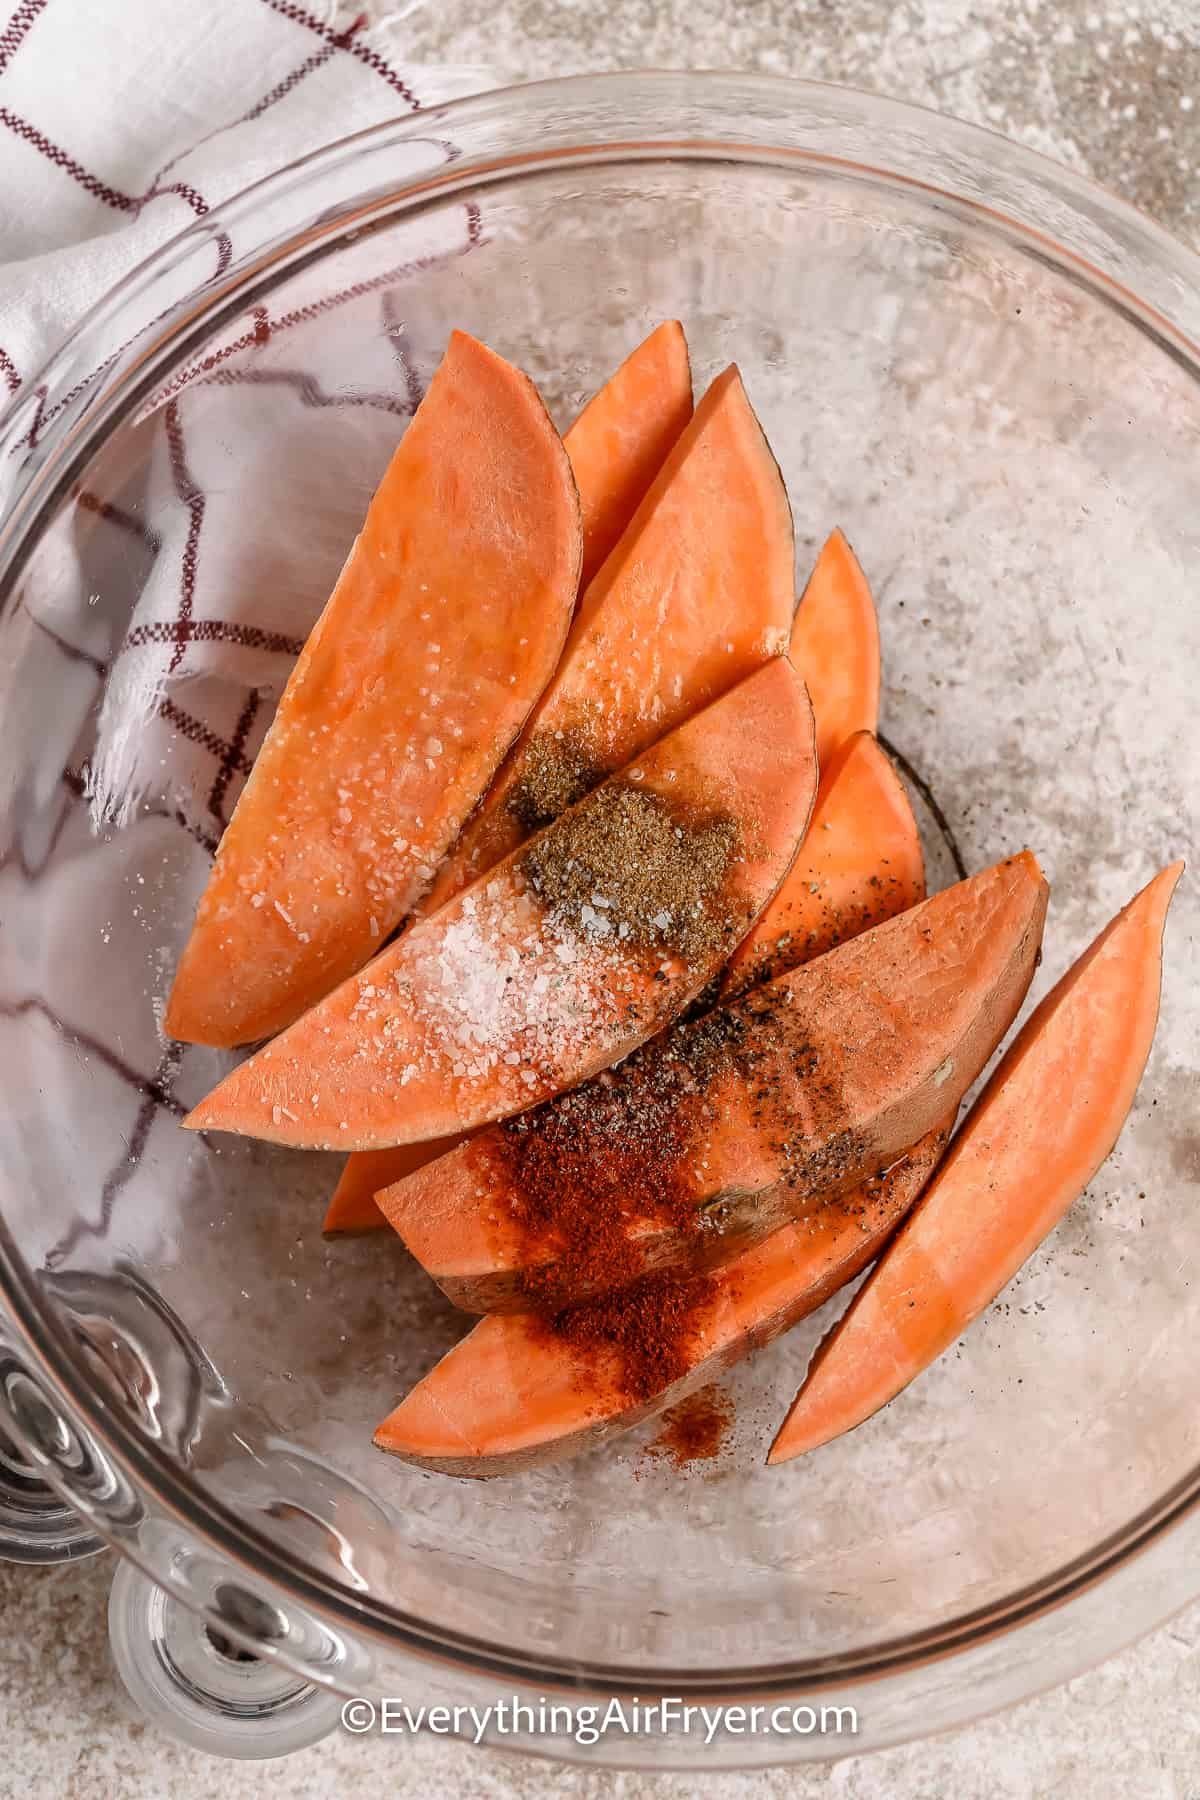 uncooked sweet potato wedges in a bowl